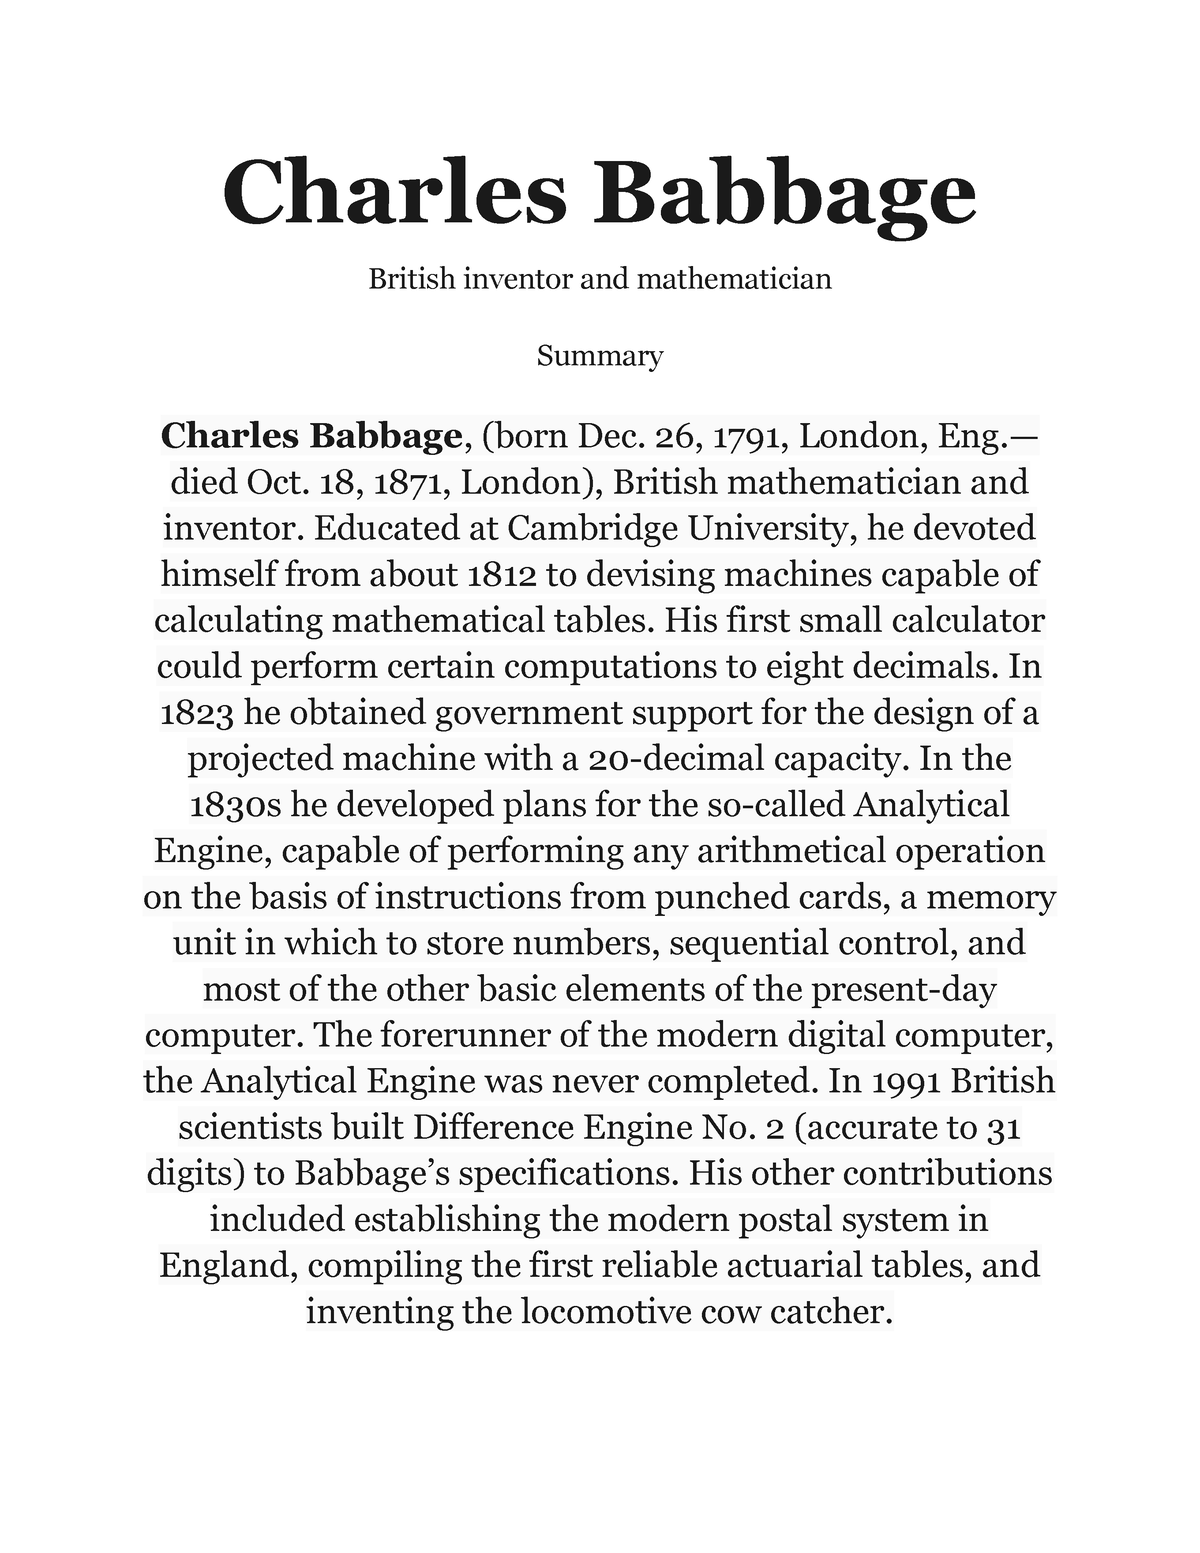 name the essay written by charles babbage